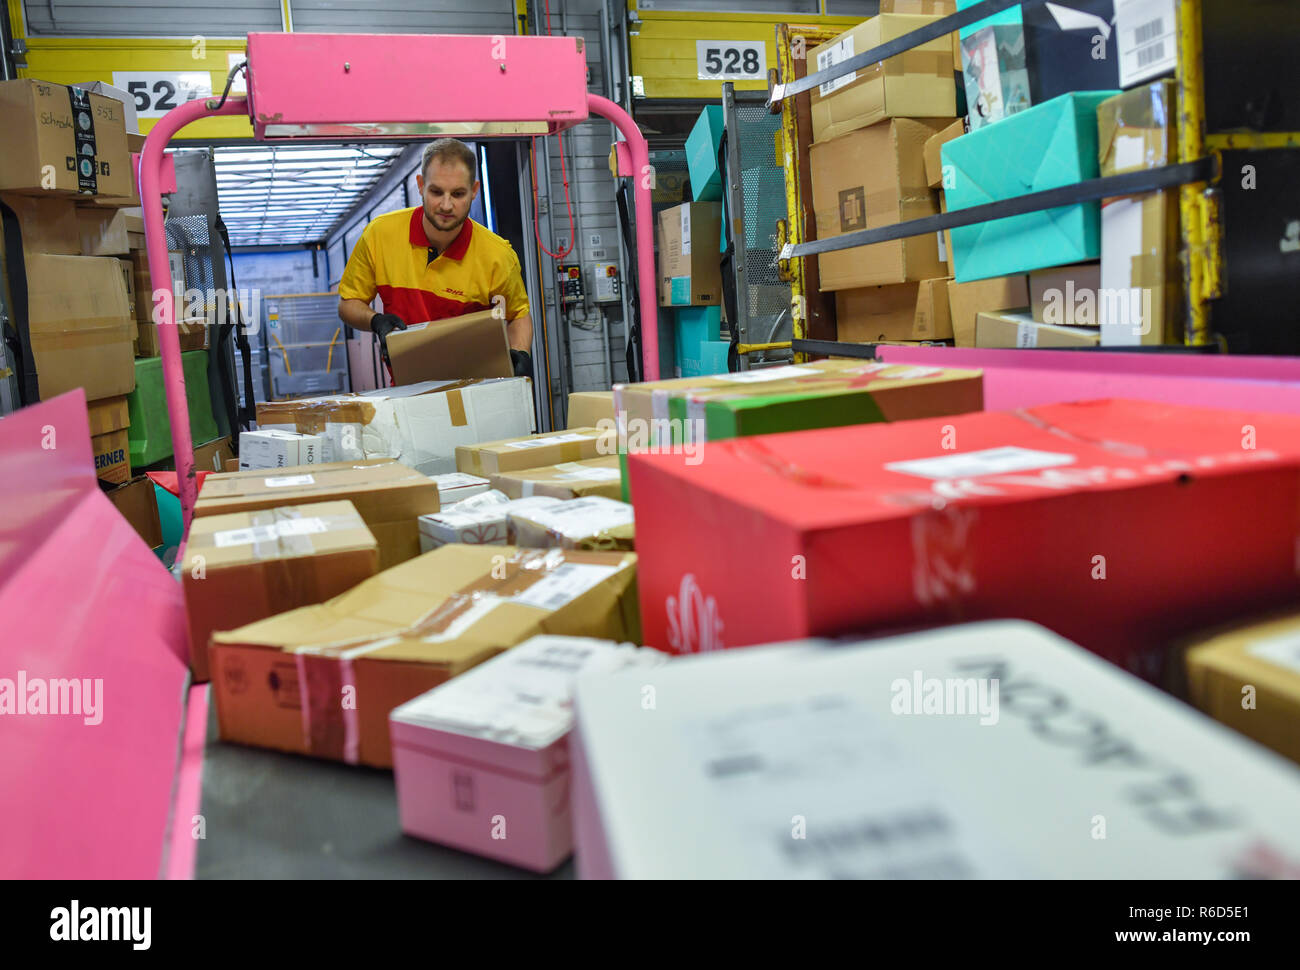 05 December 2018, Brandenburg, Rüdersdorf: Matthi Lippert, employee at the DHL-Paketzentrum, takes shipments from a conveyor belt. Let's get on with the parcels and packages: For the employees of parcel centres, it's time to roll up their sleeves again. For example at the DHL location in Rüdersdorf, Brandenburg (Märkisch-Oderland). Up to 550,000 parcels are processed here every day before Christmas. This year, the volume of consignments is again around ten percent higher than in the previous year. Photo: Patrick Pleul/dpa-Zentralbild/ZB Stock Photo